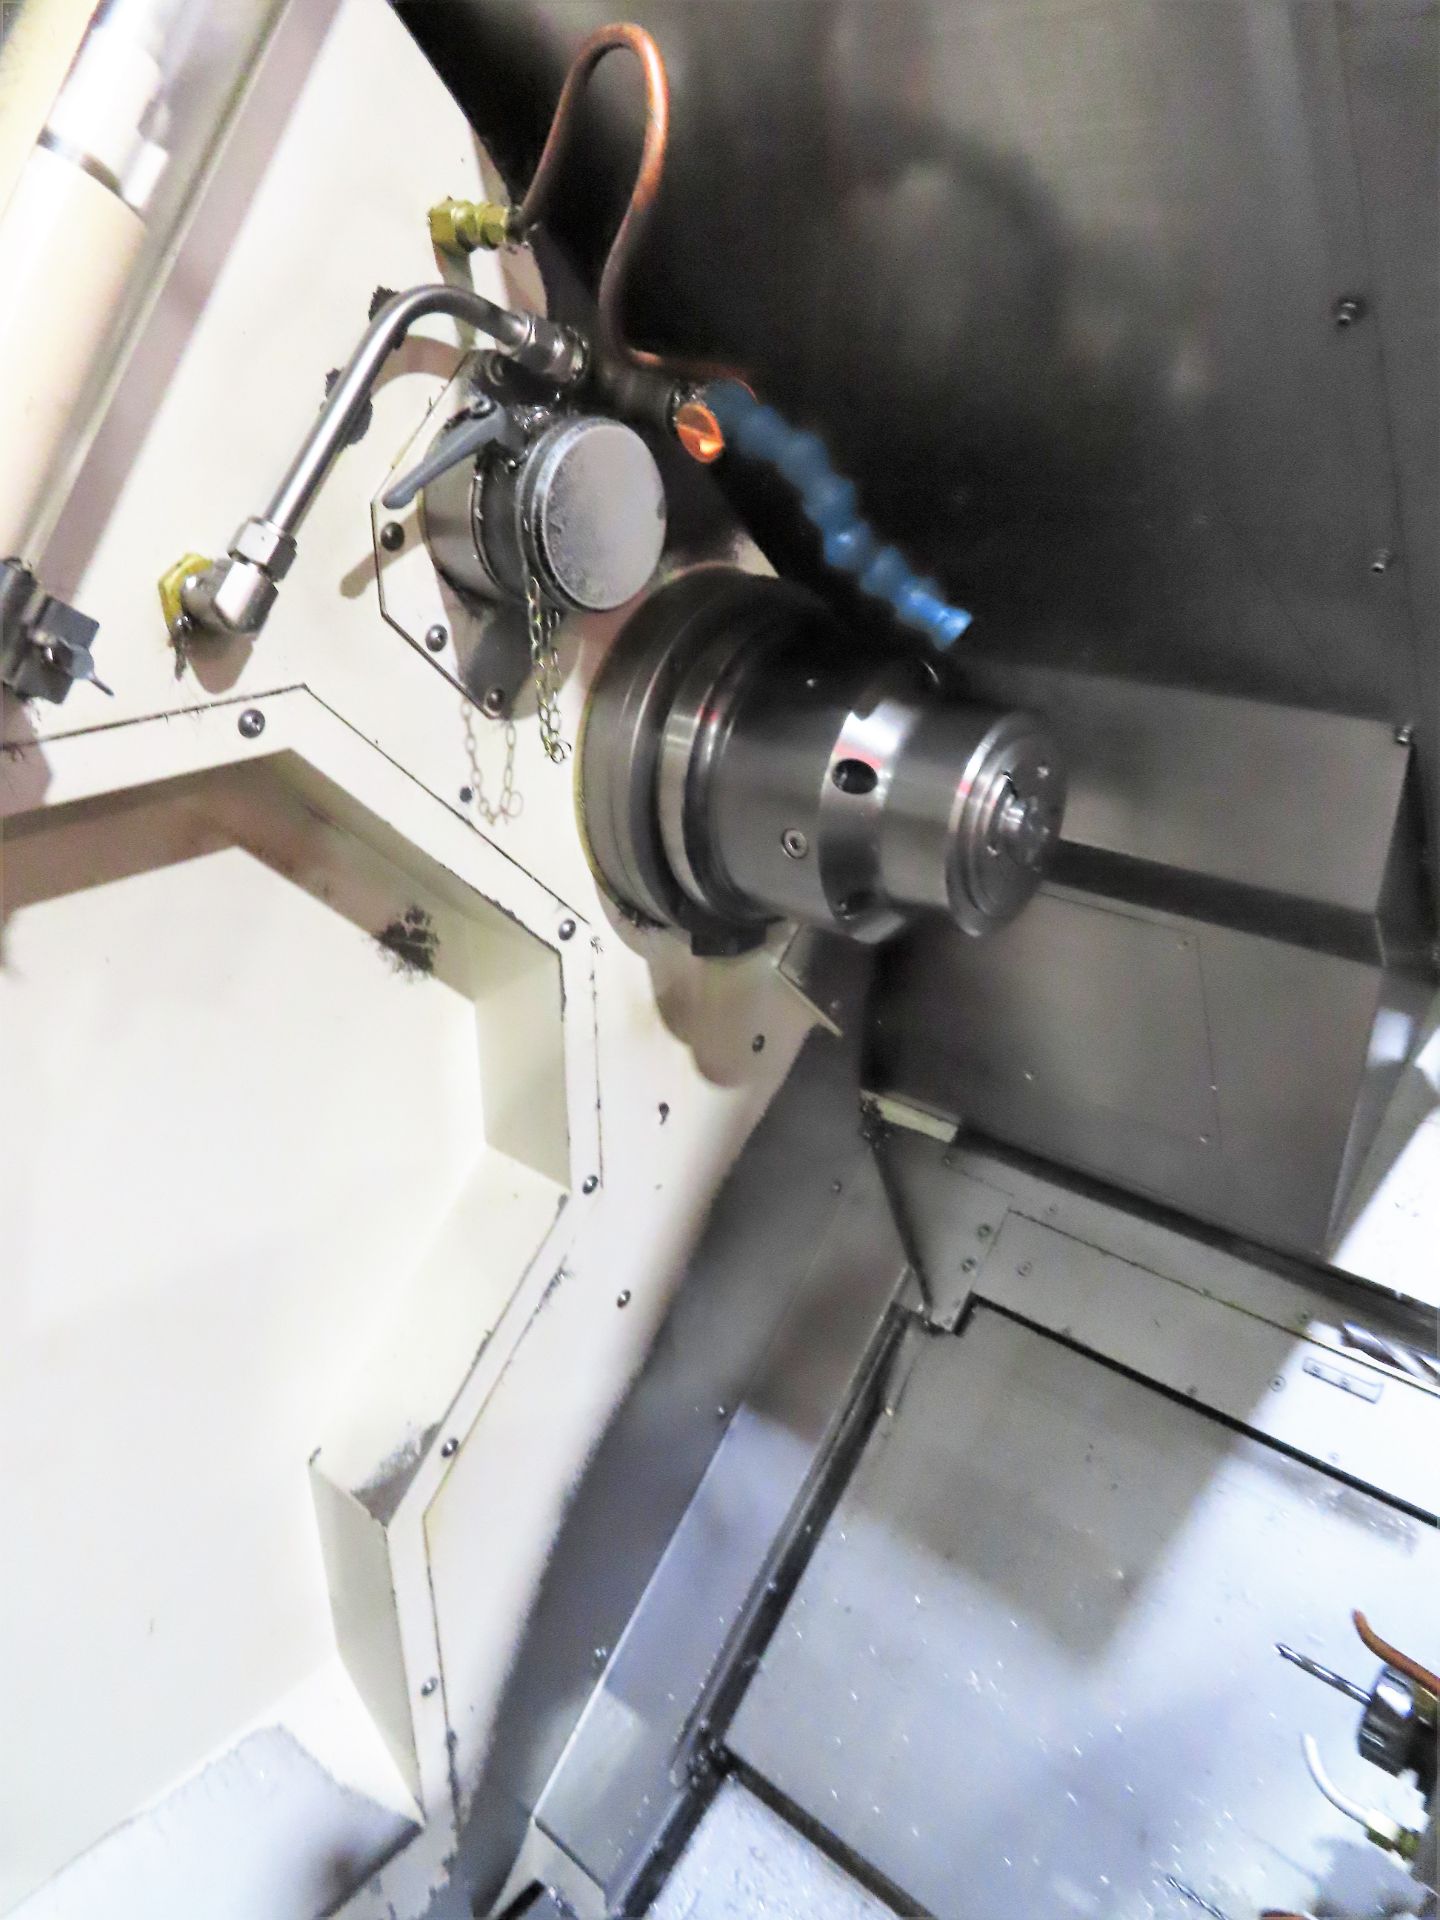 2011 Nakamura Tome WT-300 8-Axis CNC Turning/Milling Center, S/N M302803 - Image 9 of 18